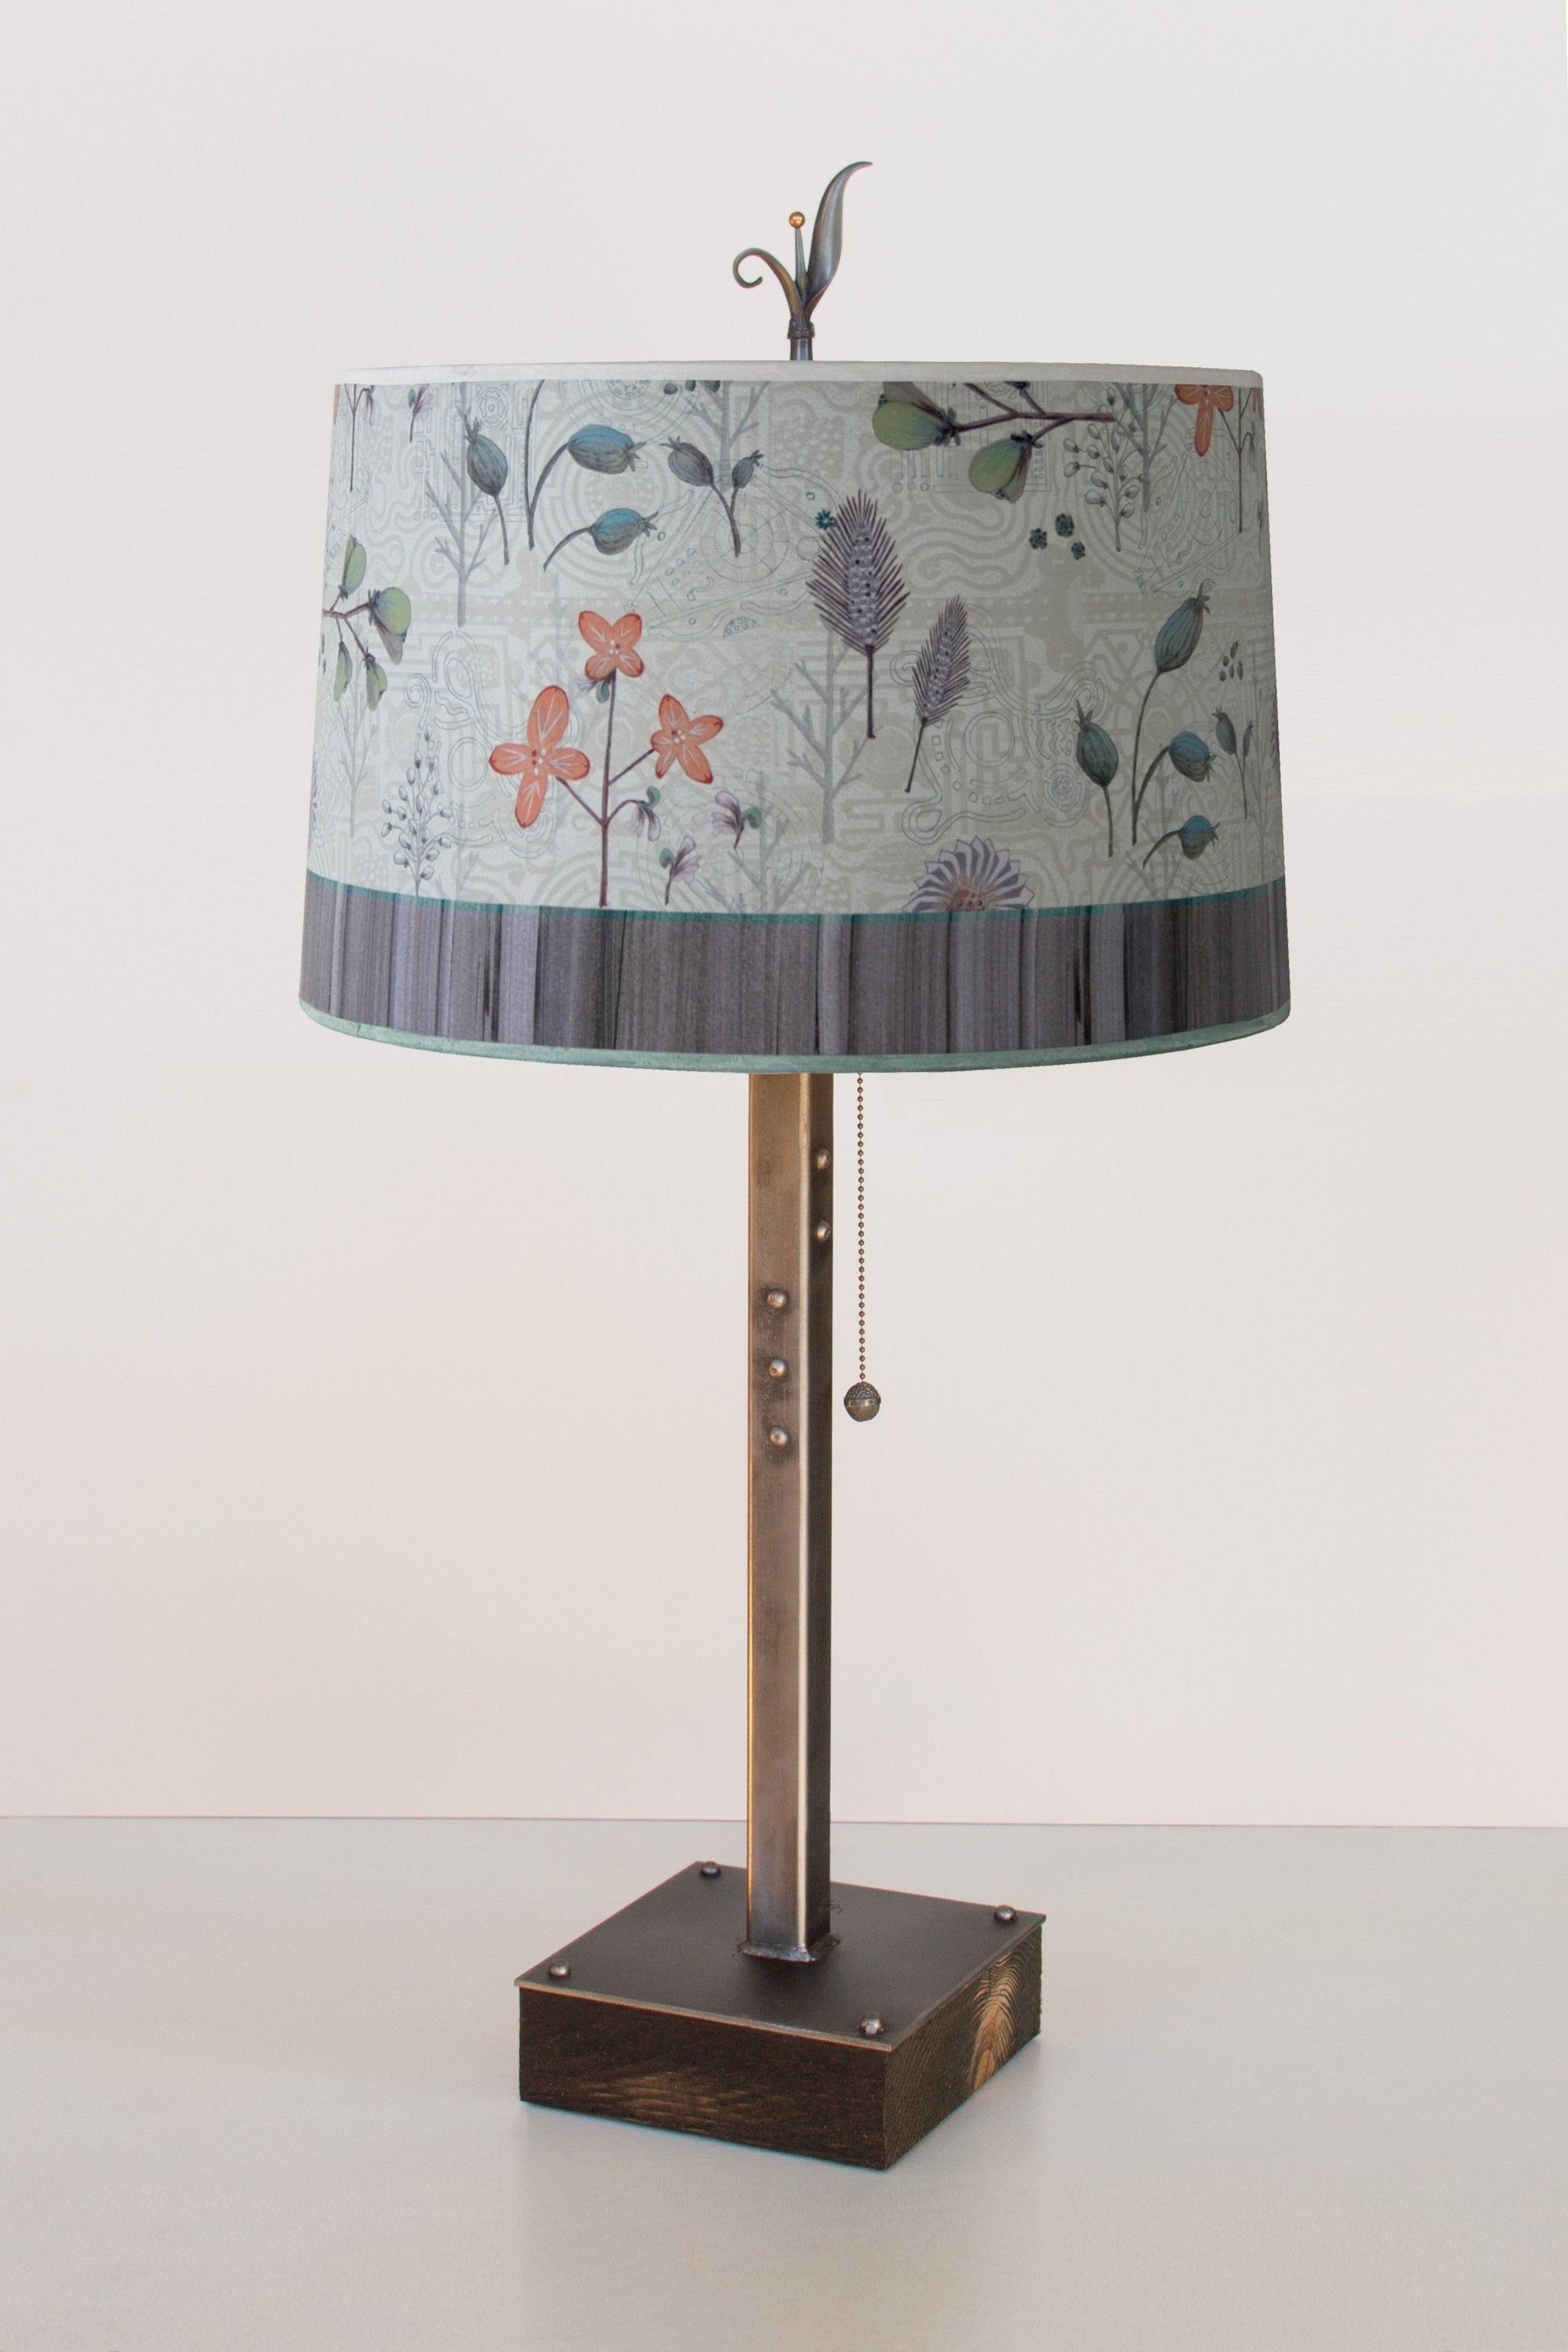 Steel Table Lamp on Wood with Large Drum Shade in Flora and Maze